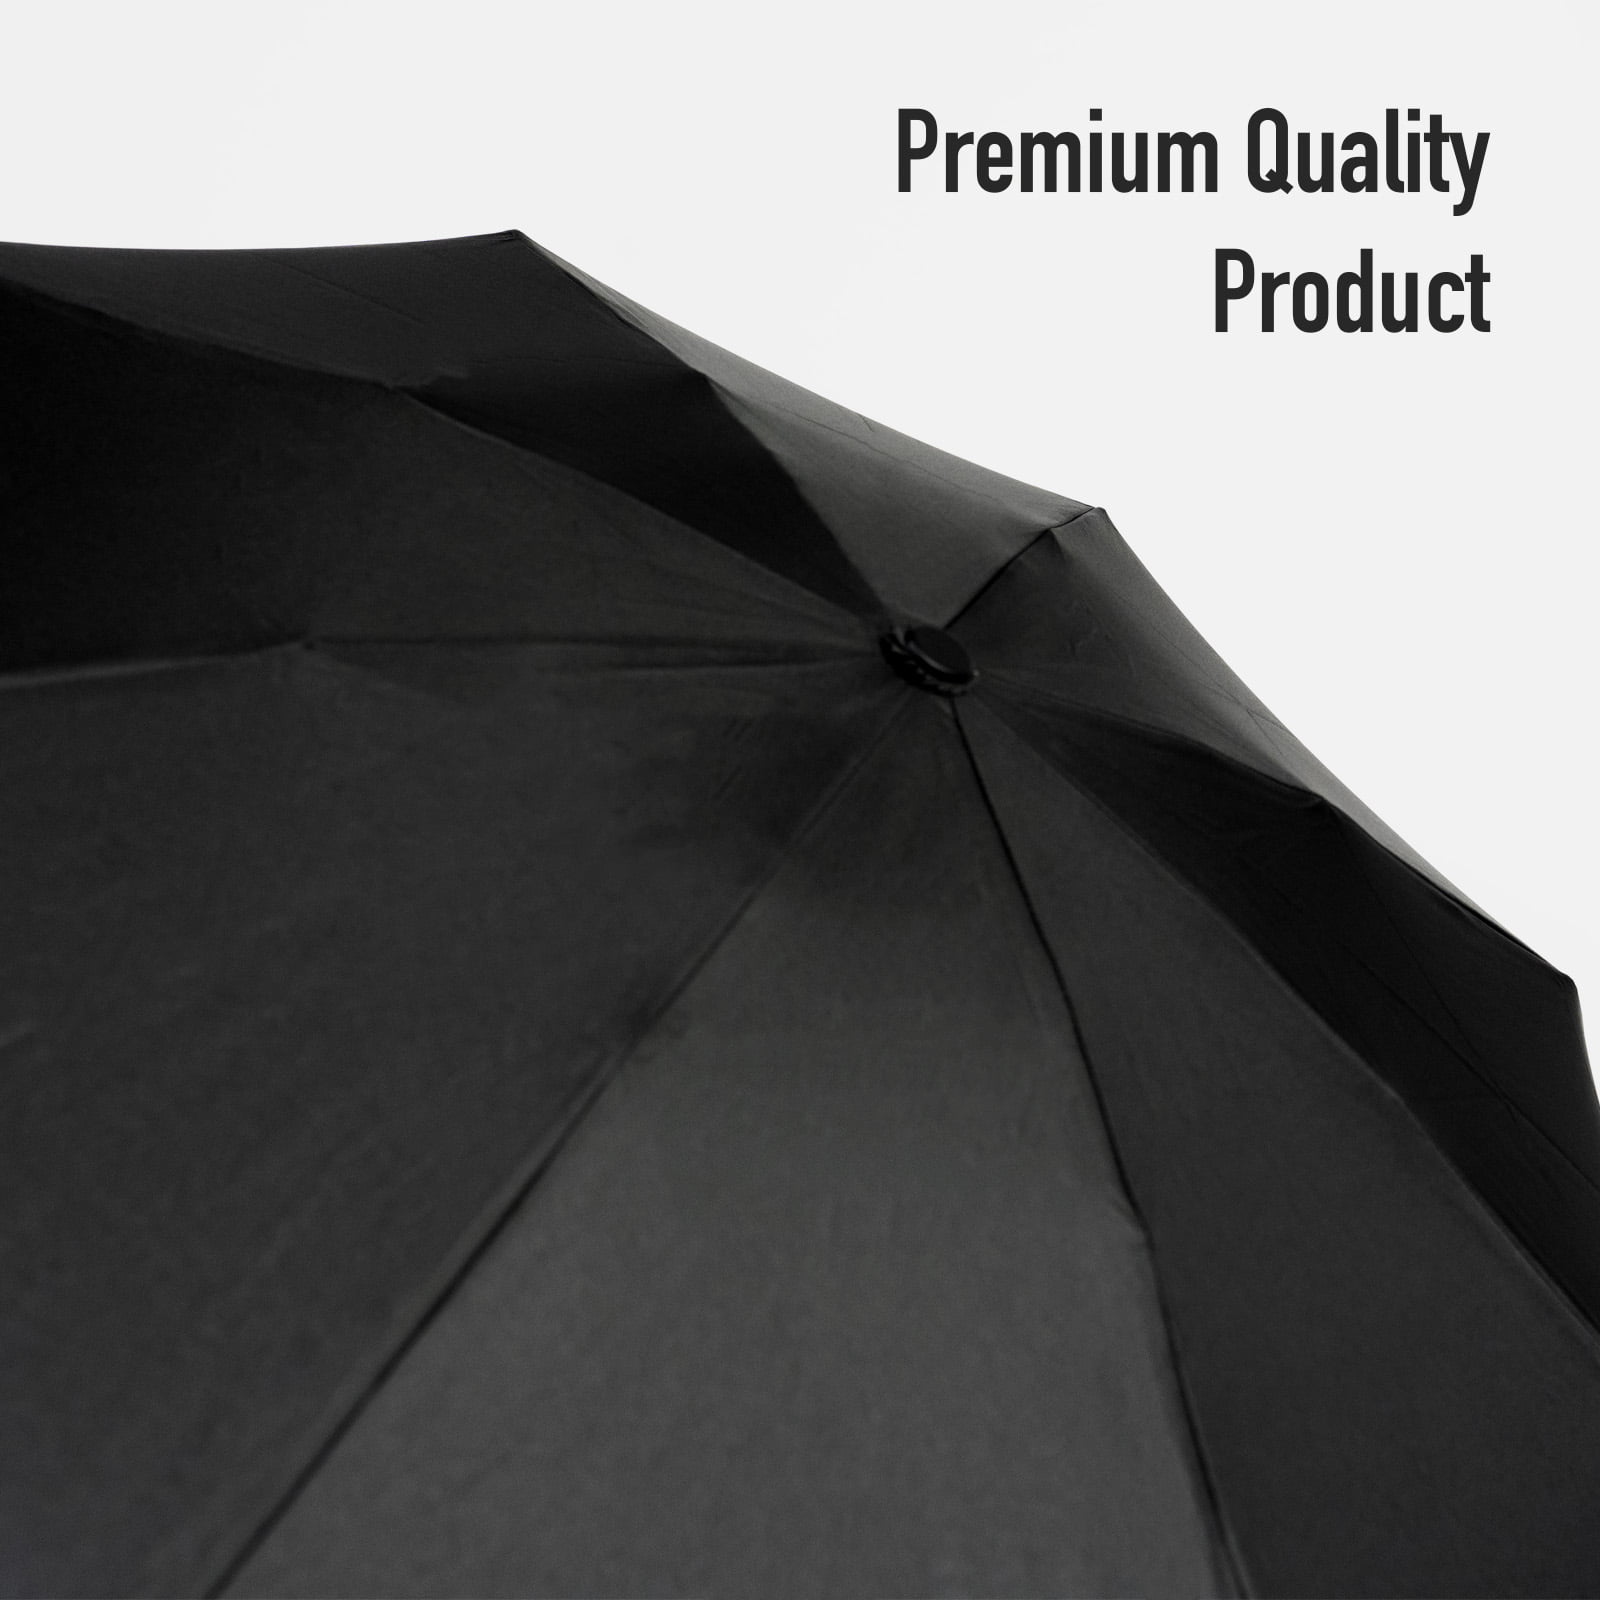 City Compact Silver Auto Open and Close Folding Umbrella Infographic Showing Quality of Canopy